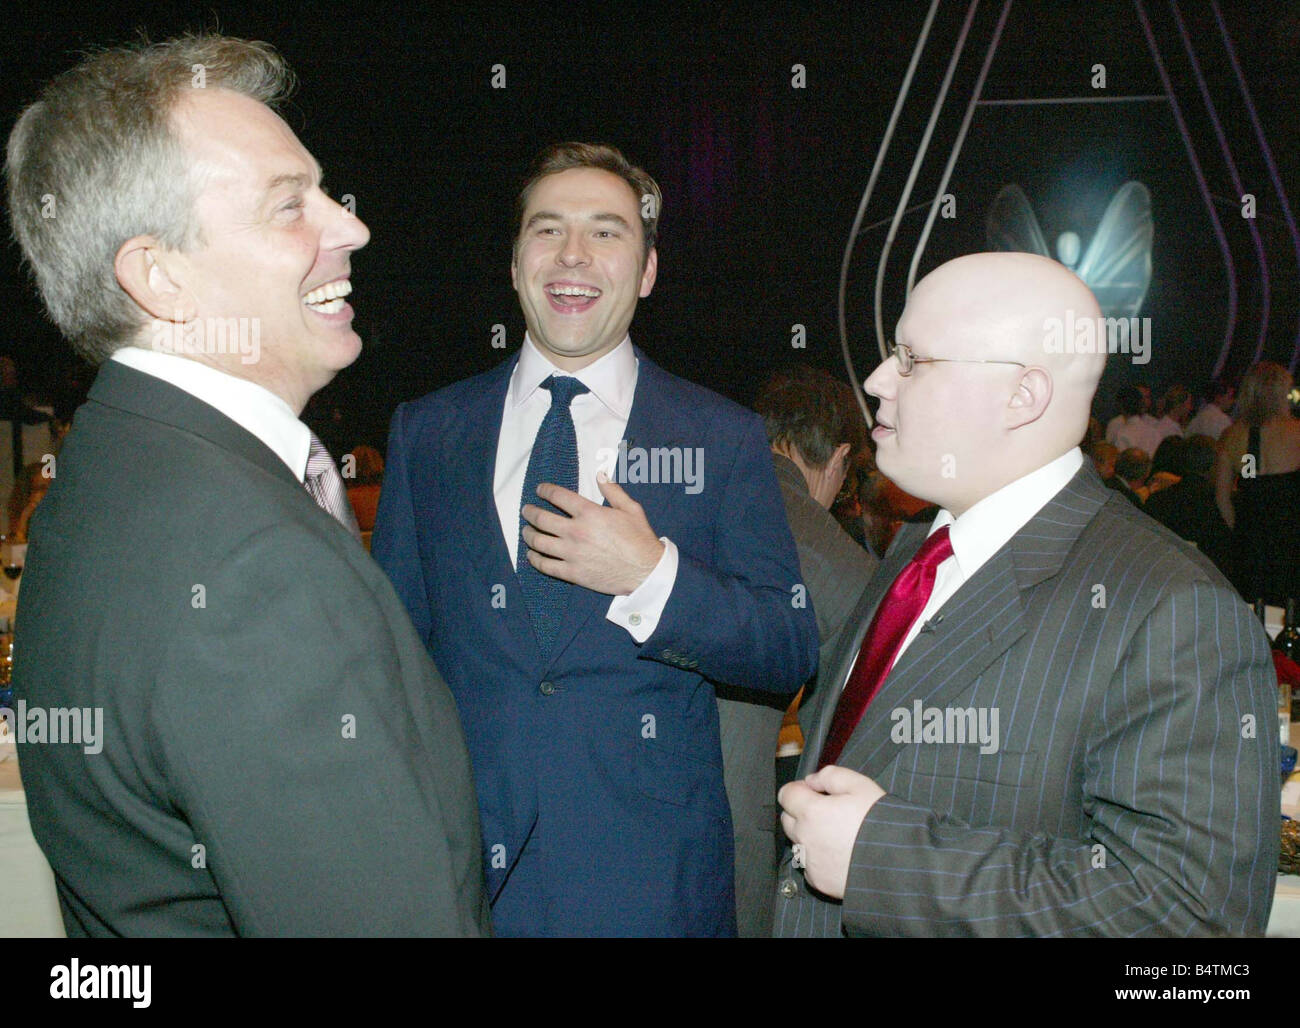 The Daily Mirror s Pride of Britain Awards from the LWT Studios in London 10th October 2005 Tony Blair David Walliams and Matt Lucas Stock Photo